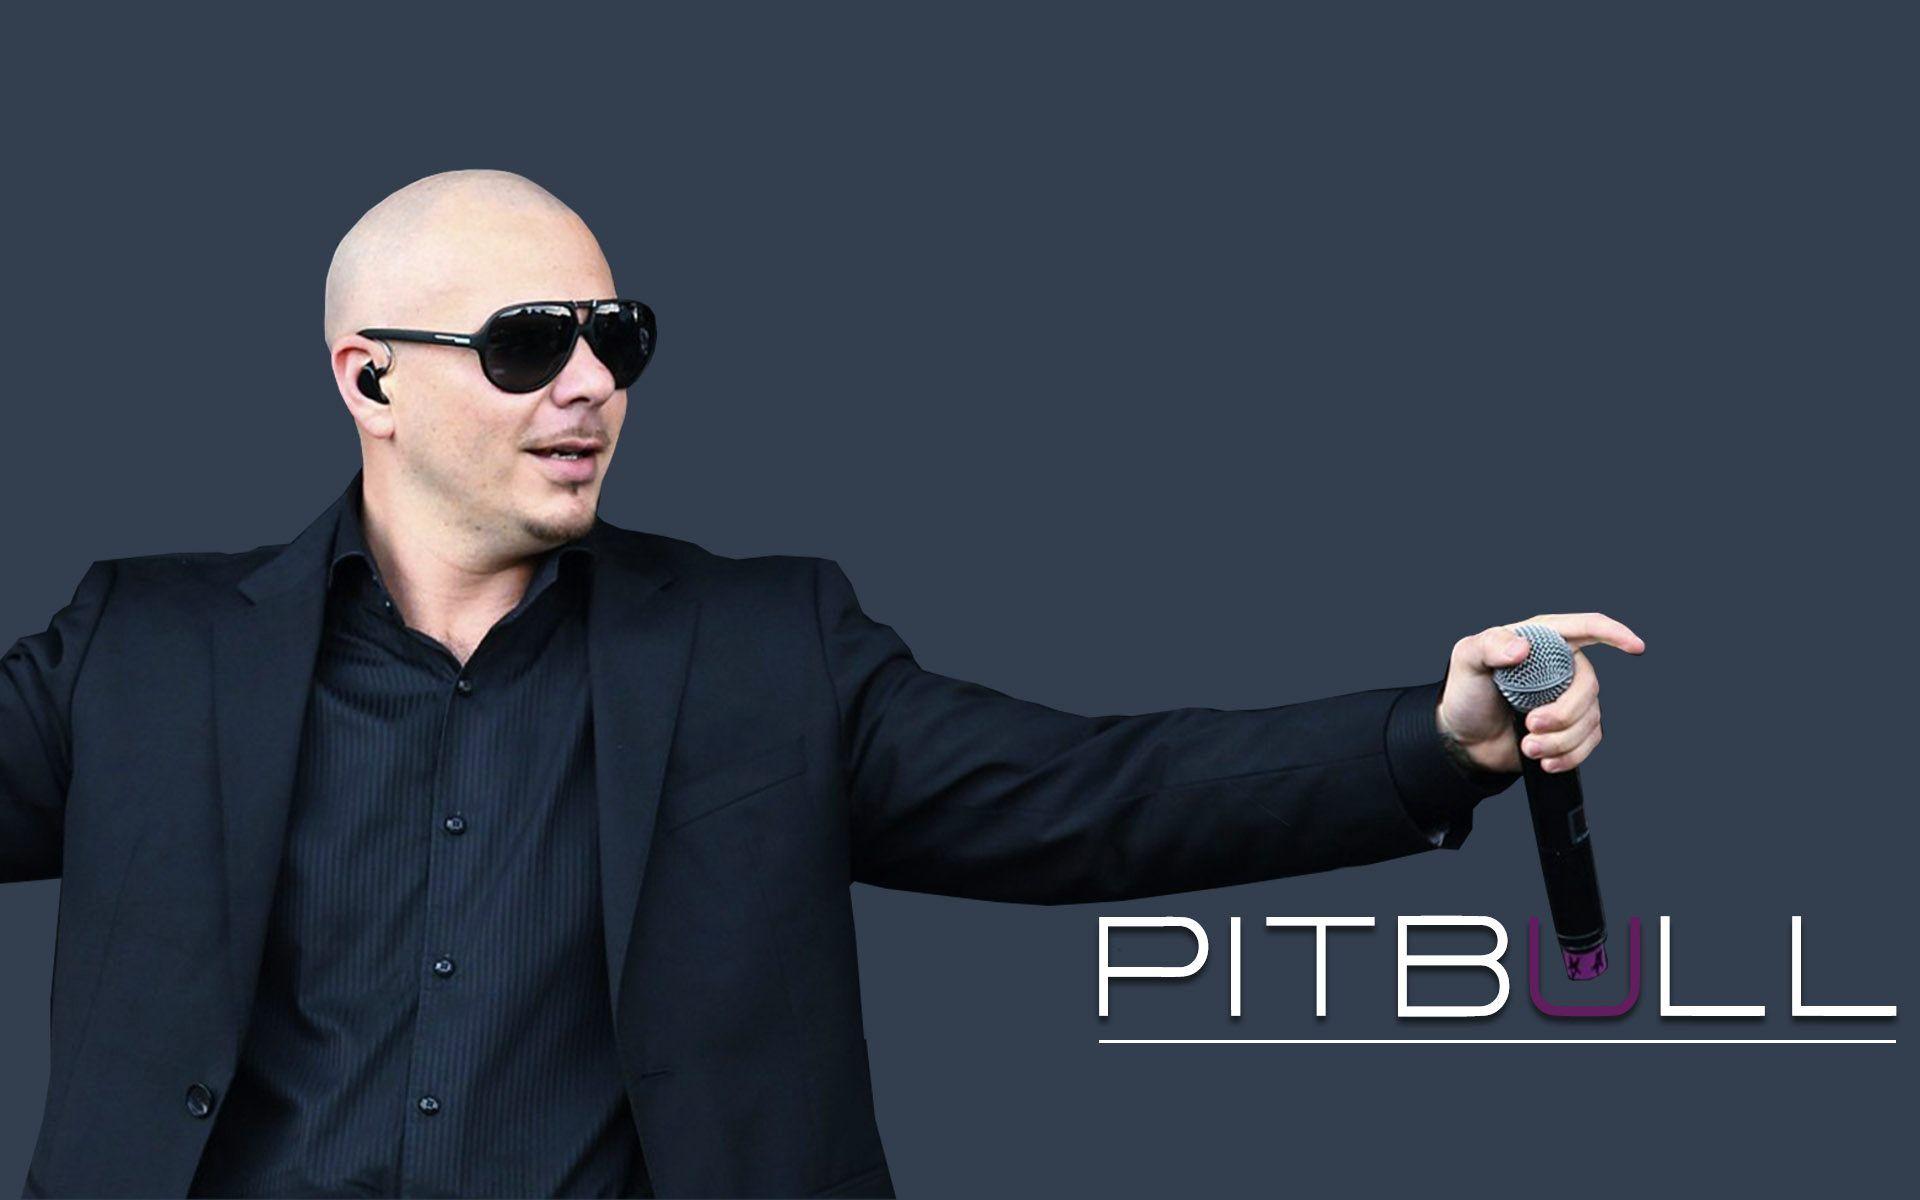 Back to time pitbull mp3 torrent add data to existing figure matlab torrent